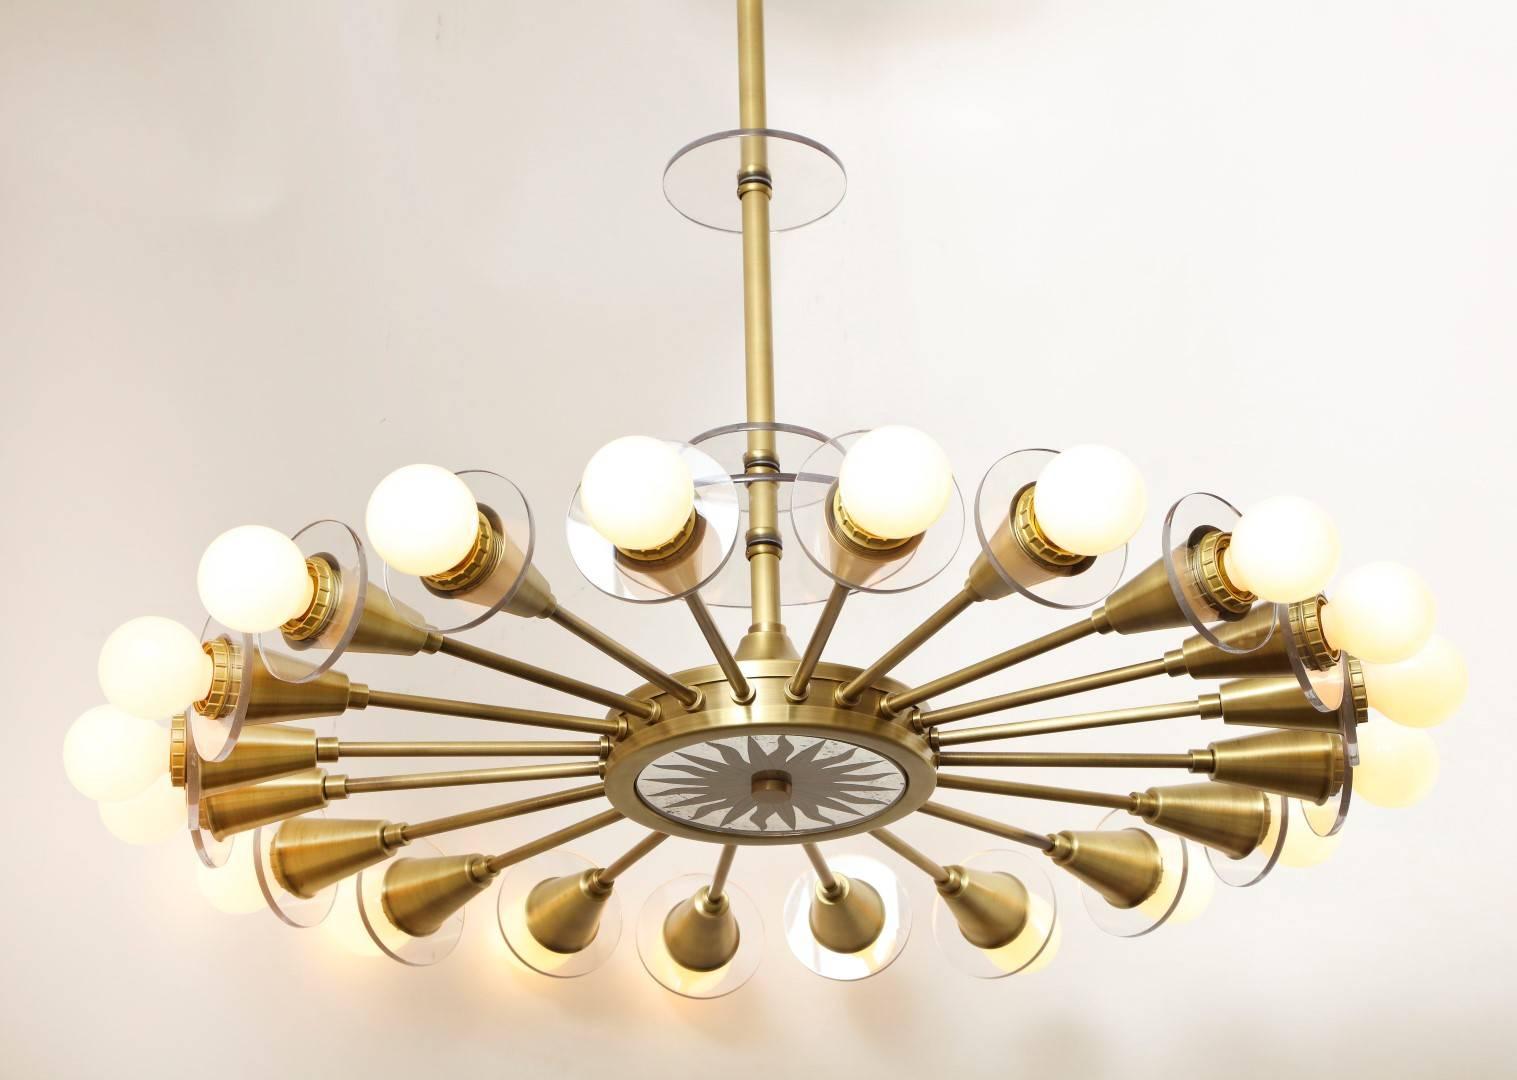 The Odom 20-Light mirrored sunburst fixture. The brass frame with round mirrored insert on oversized ceiling medallion and underside of fixture having eglomise sunburst motif inset in brass frame, the underside secured by finial in center of glass